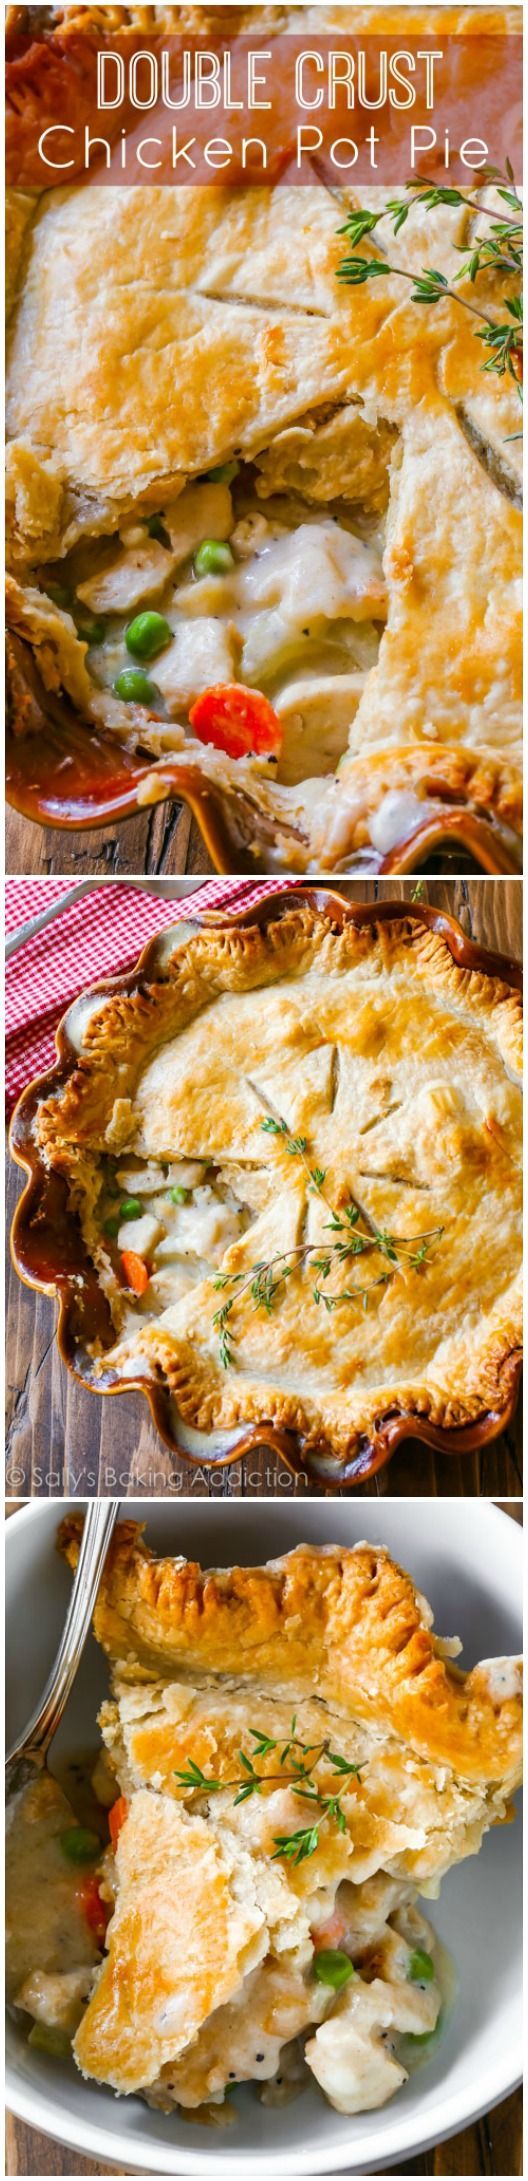 This double crust chicken pot pie is perfect when you’re looking for comfort food and don’t have all the time and energy in